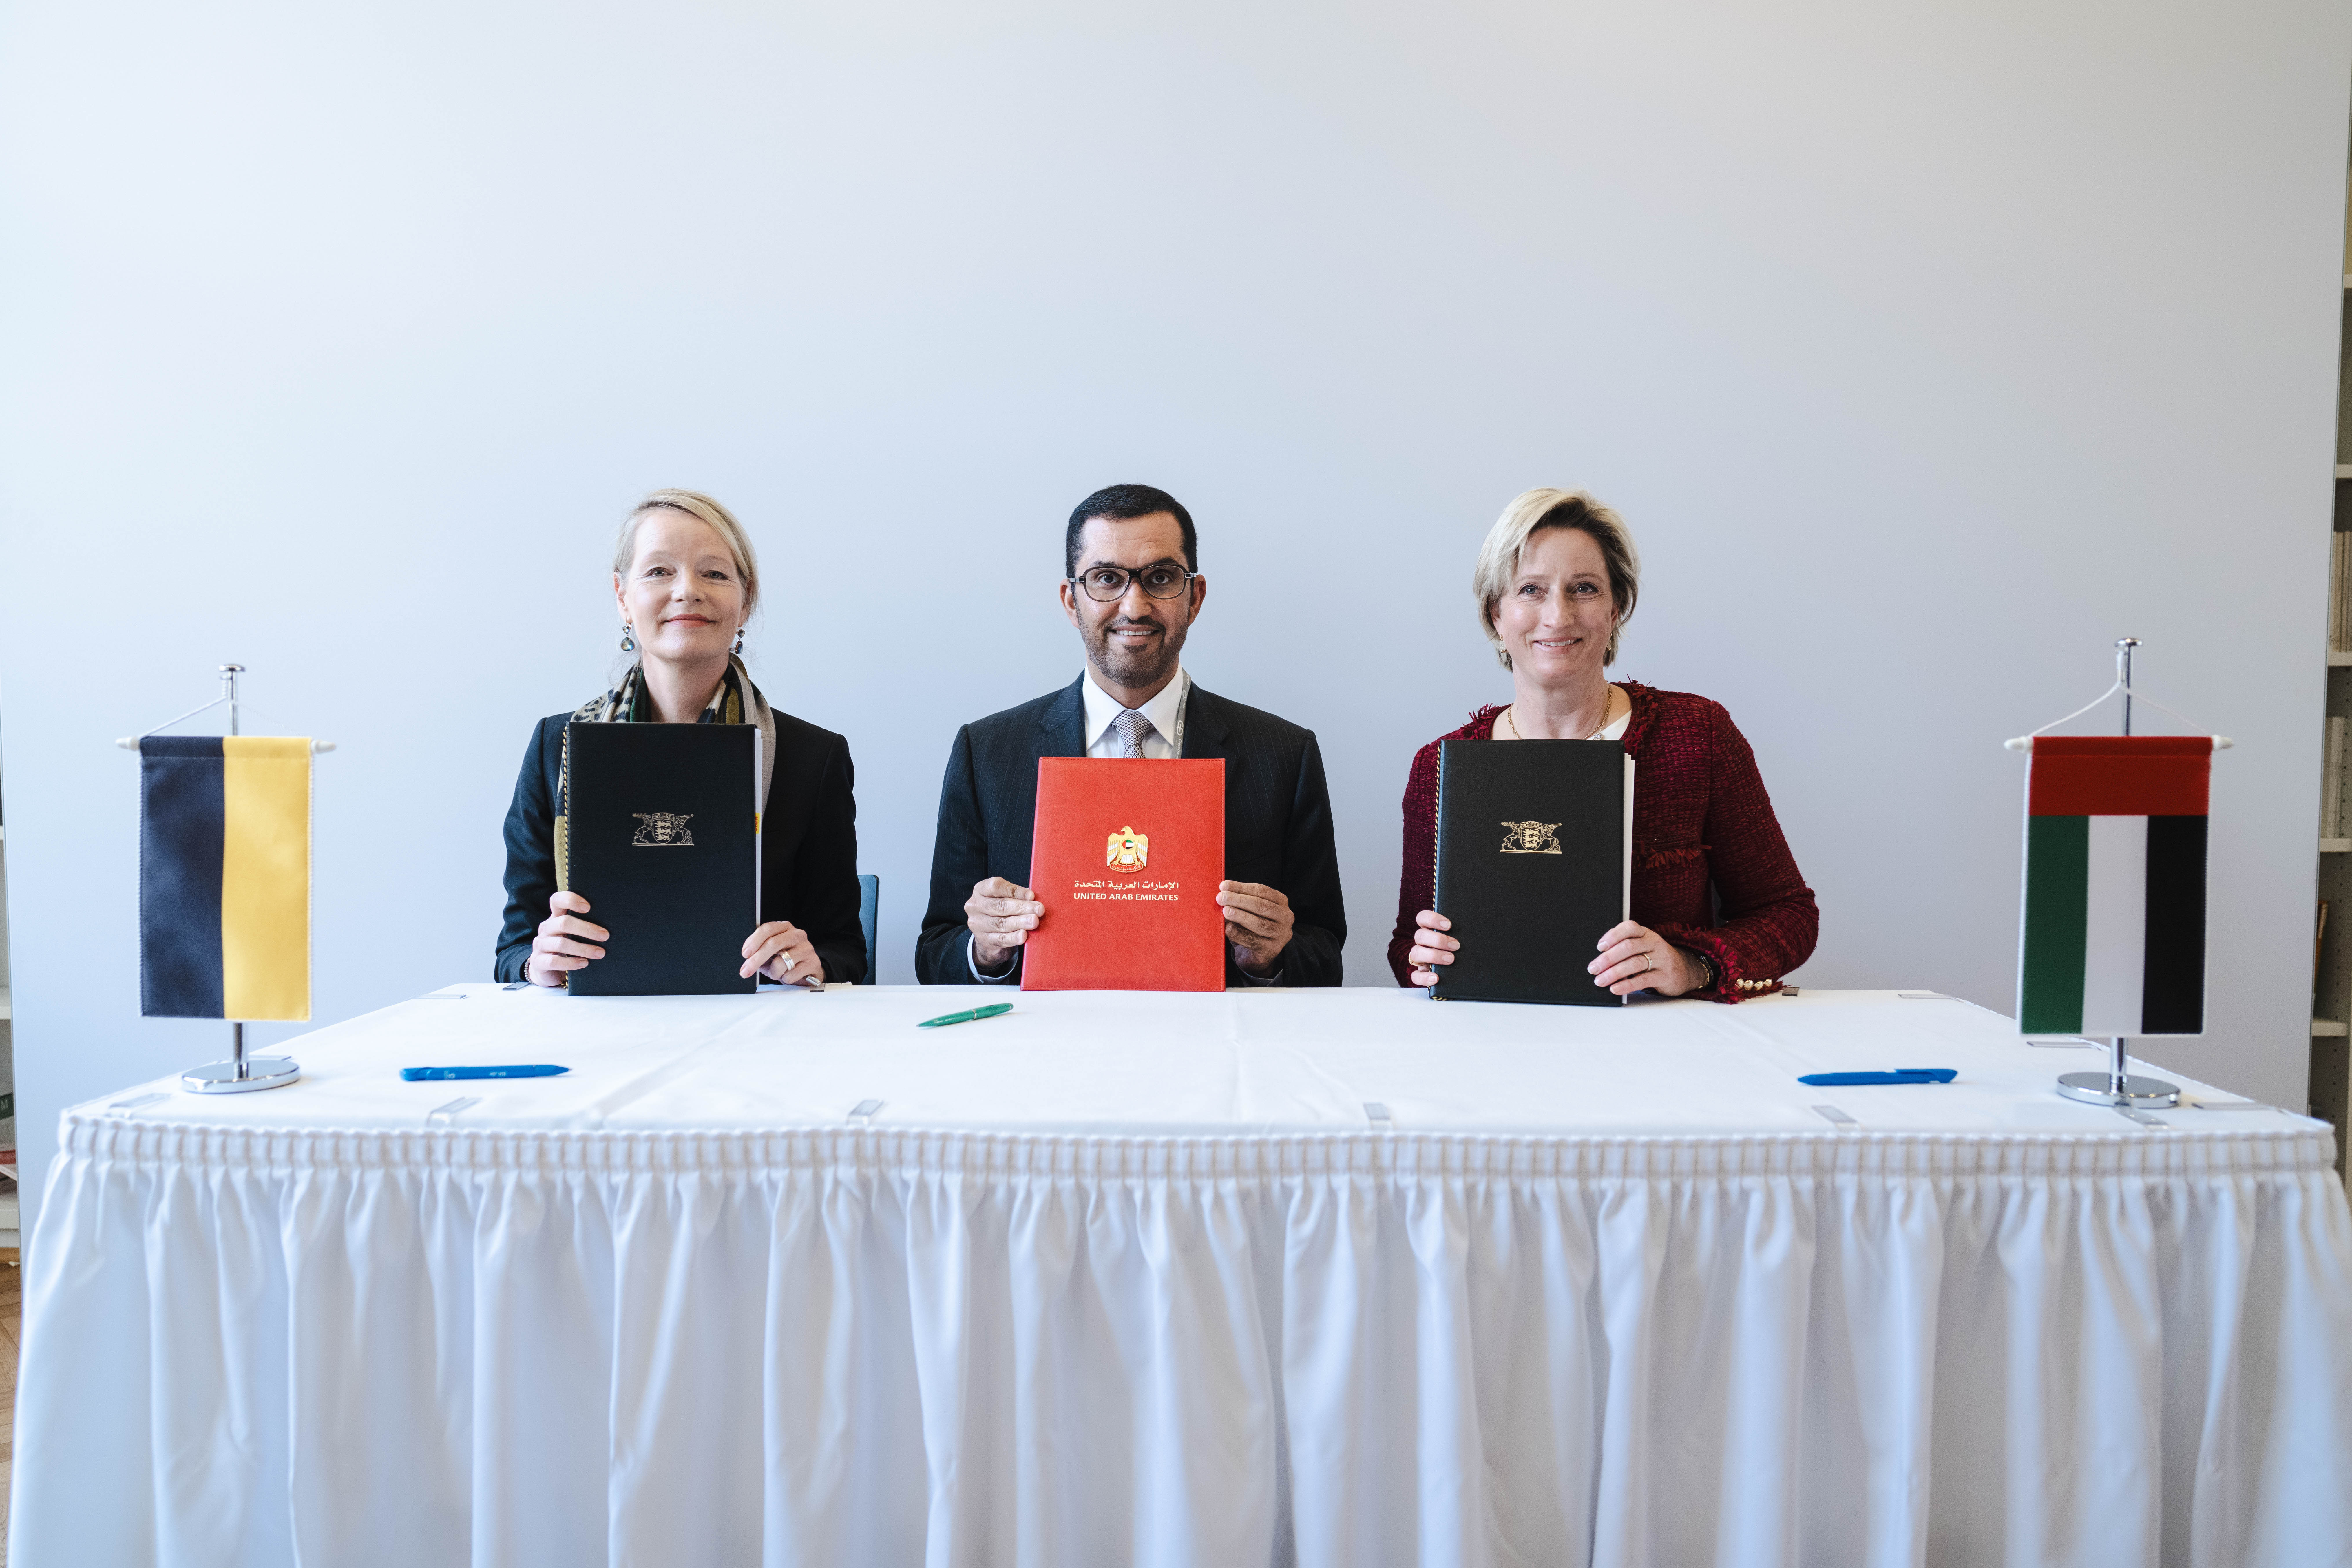 UAE, Baden-Württemberg sign comprehensive Joint Declaration of Intent on industrial cooperation, supply chain resiliency, and decarbonization opportunities